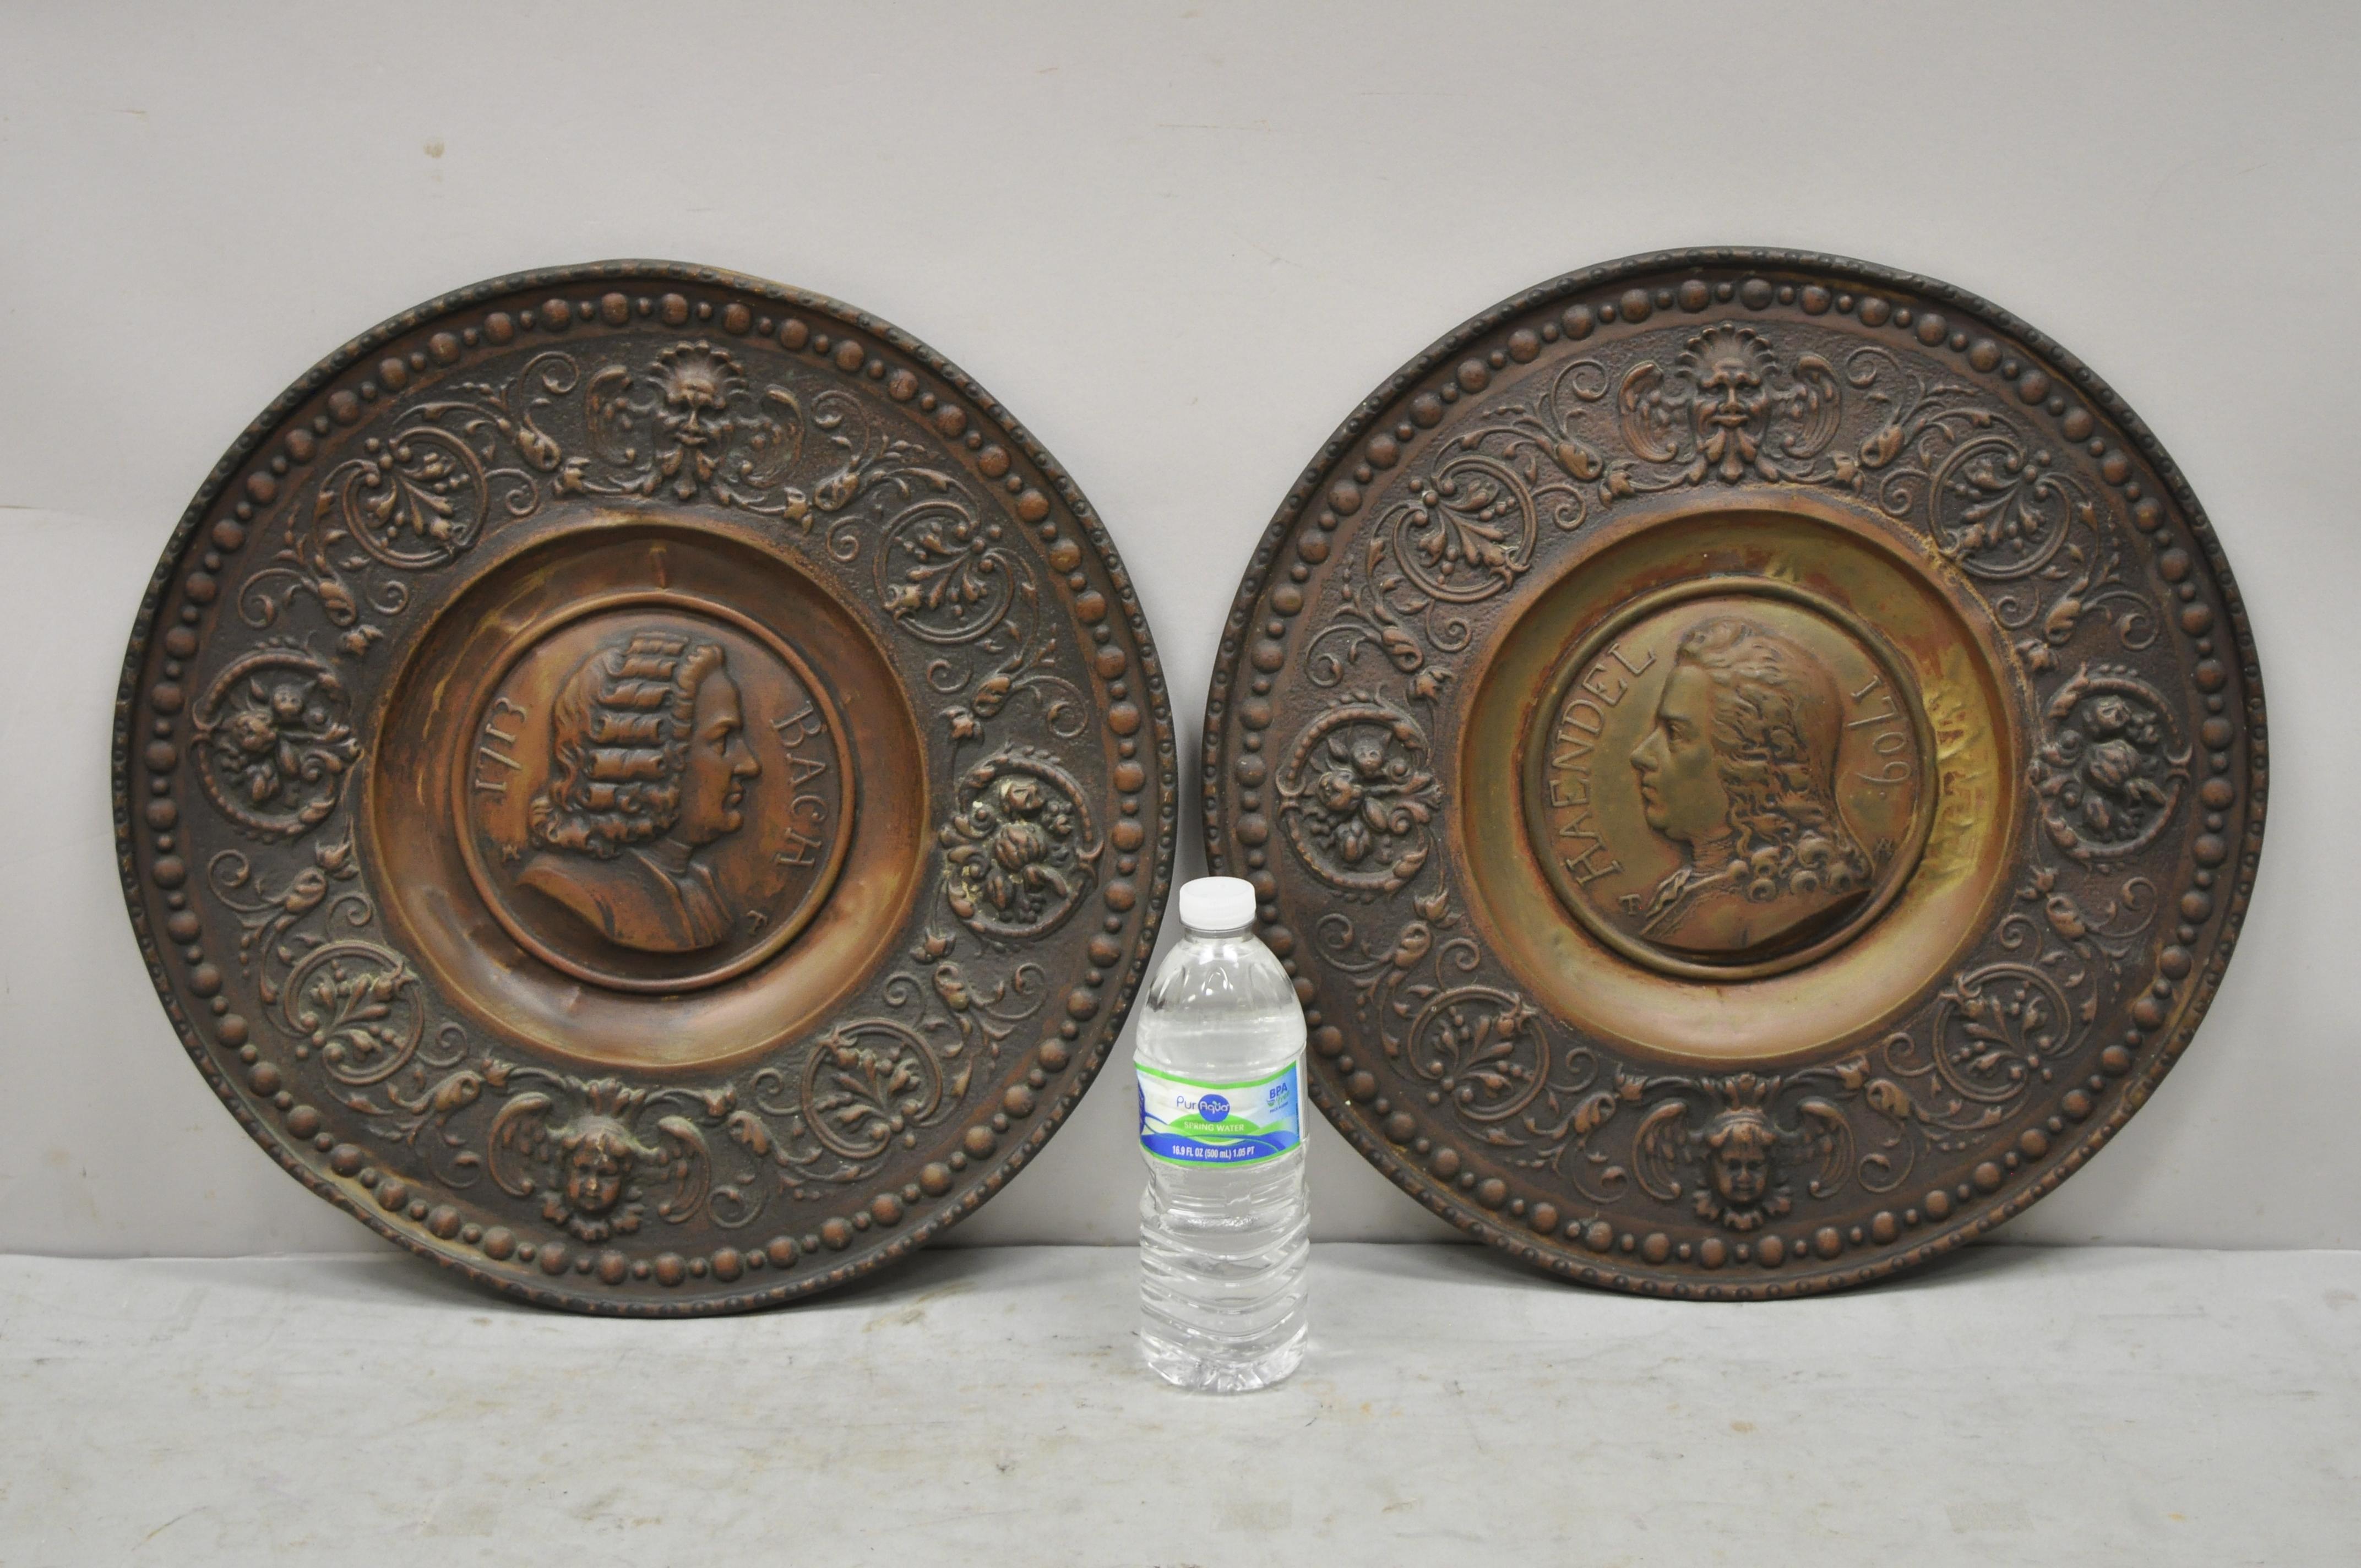 Antique Embossed Copper Neoclassical Bach and Haendel charger plates - a Pair. Set include (2) chargers, (1) Bach, (1) Haendel. Measurements: 1